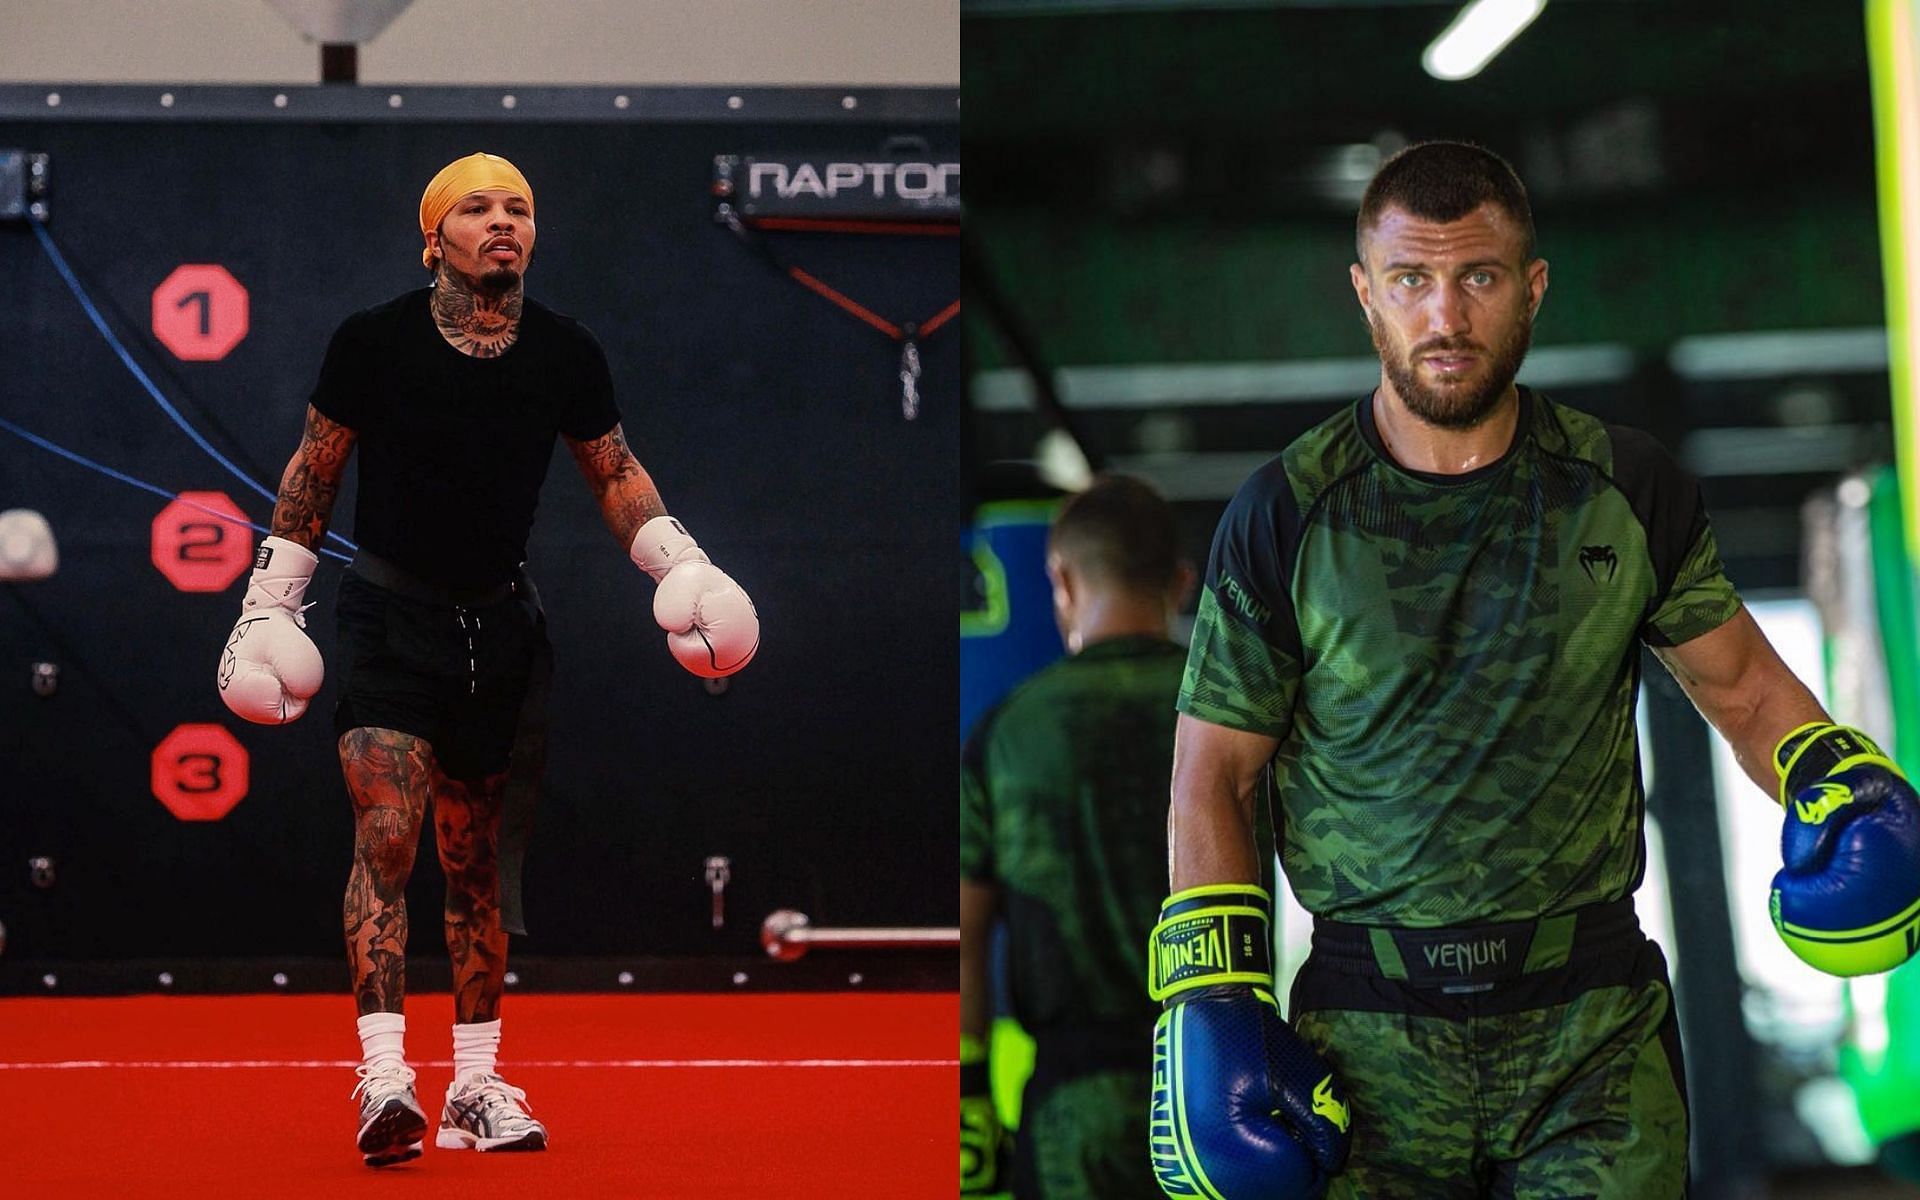 Gervonta Davis (left) vs. Vasiliy Lomachenko (right) fight set to happen at the end of this year [Images courtesy: @gervontaa and @lomachenkovasiliy on Instagram]